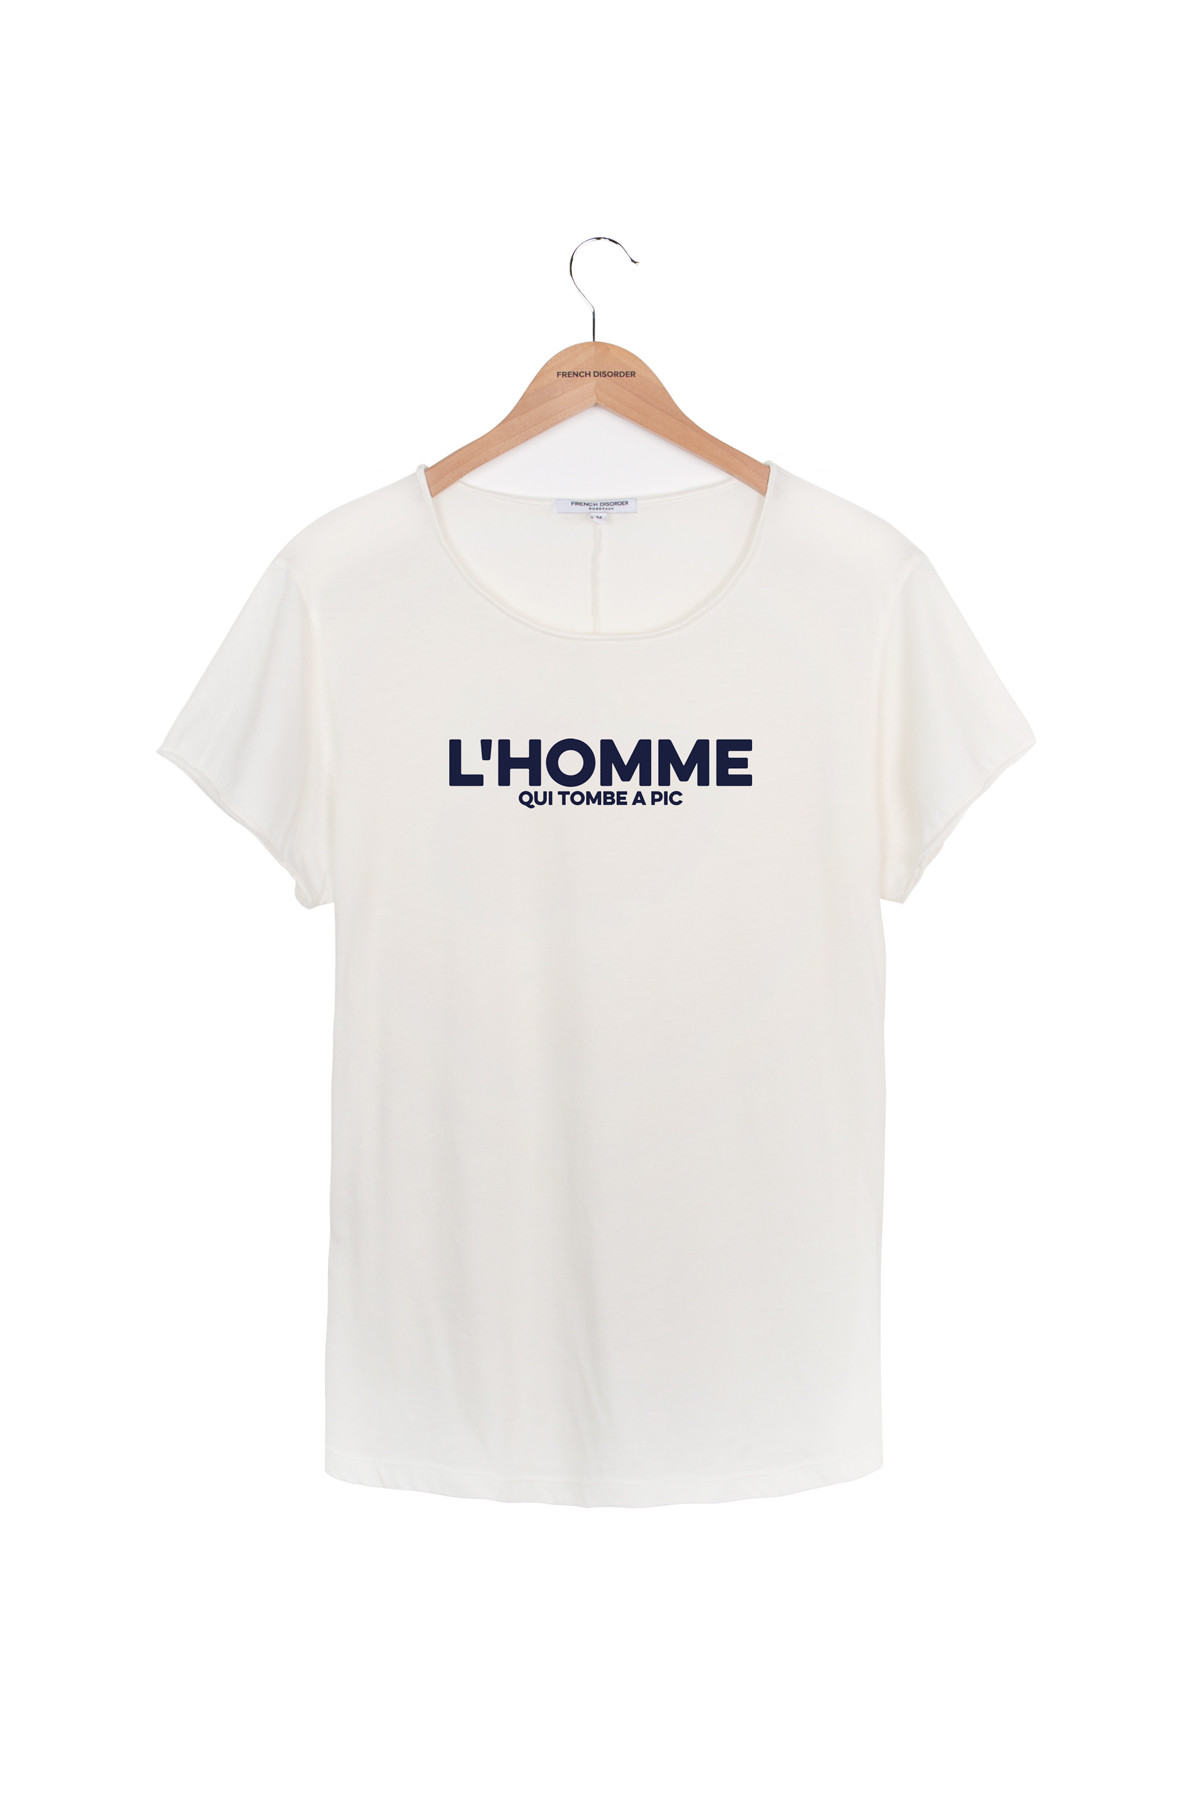 Photo de Anciennes collections homme Tshirt Aron L'HOMME QUI TOMBE A PIC chez French Disorder